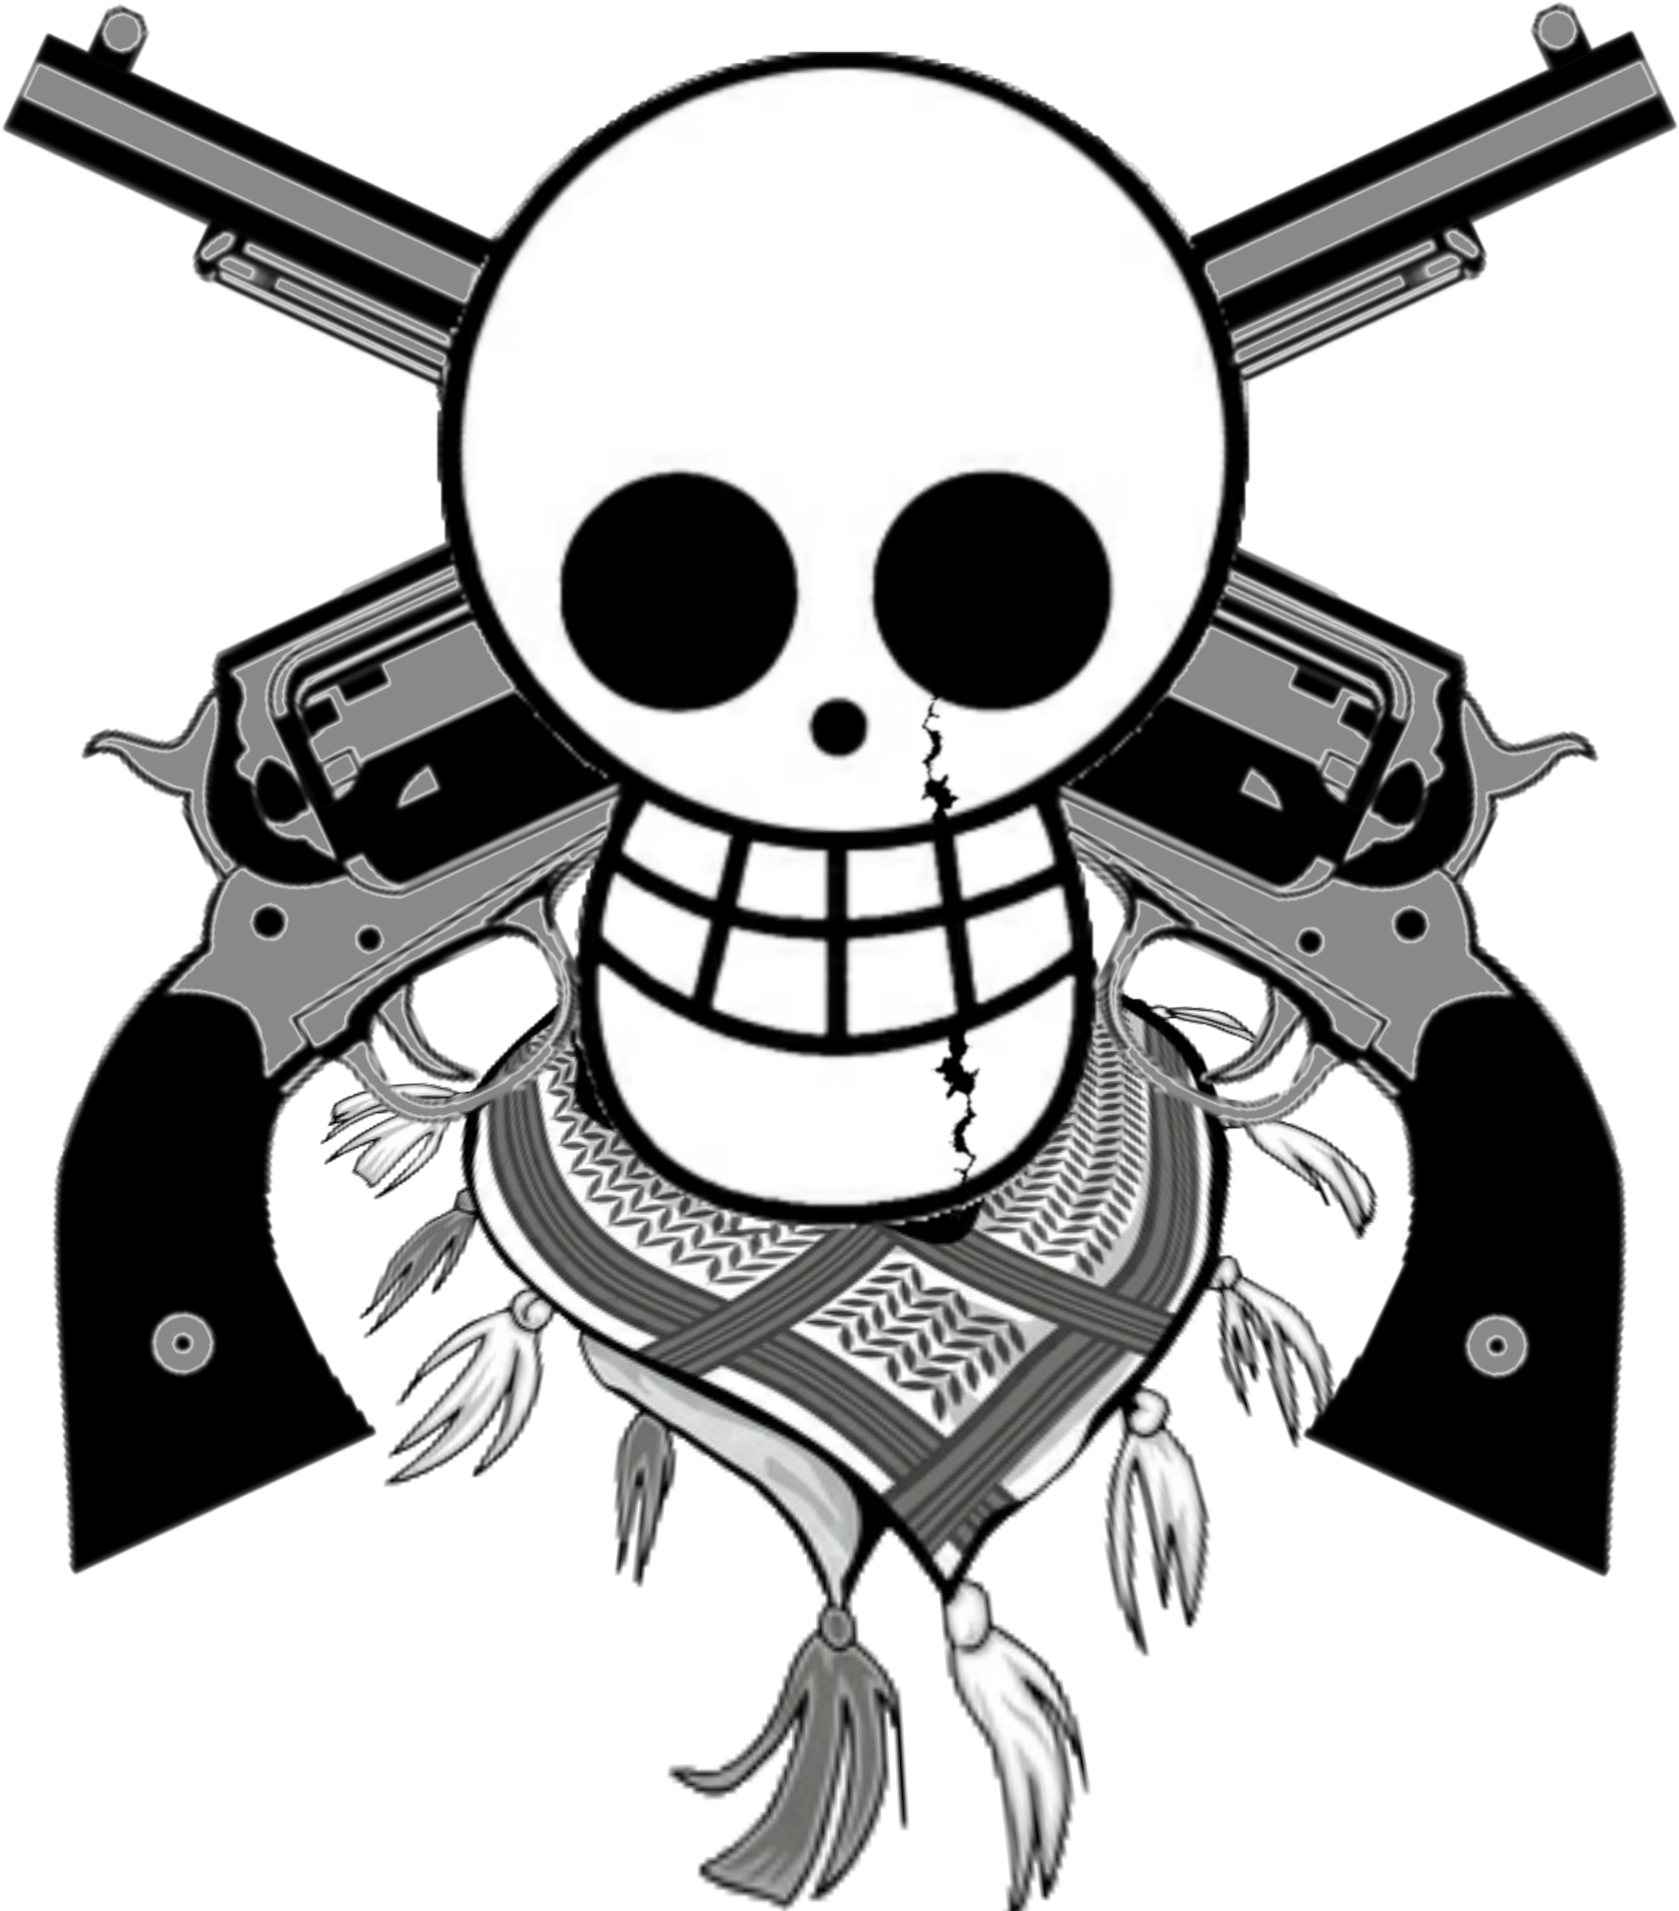 Sharing My Jolly Roger - Jolly Rogers One Piece Flags (1920x1920)